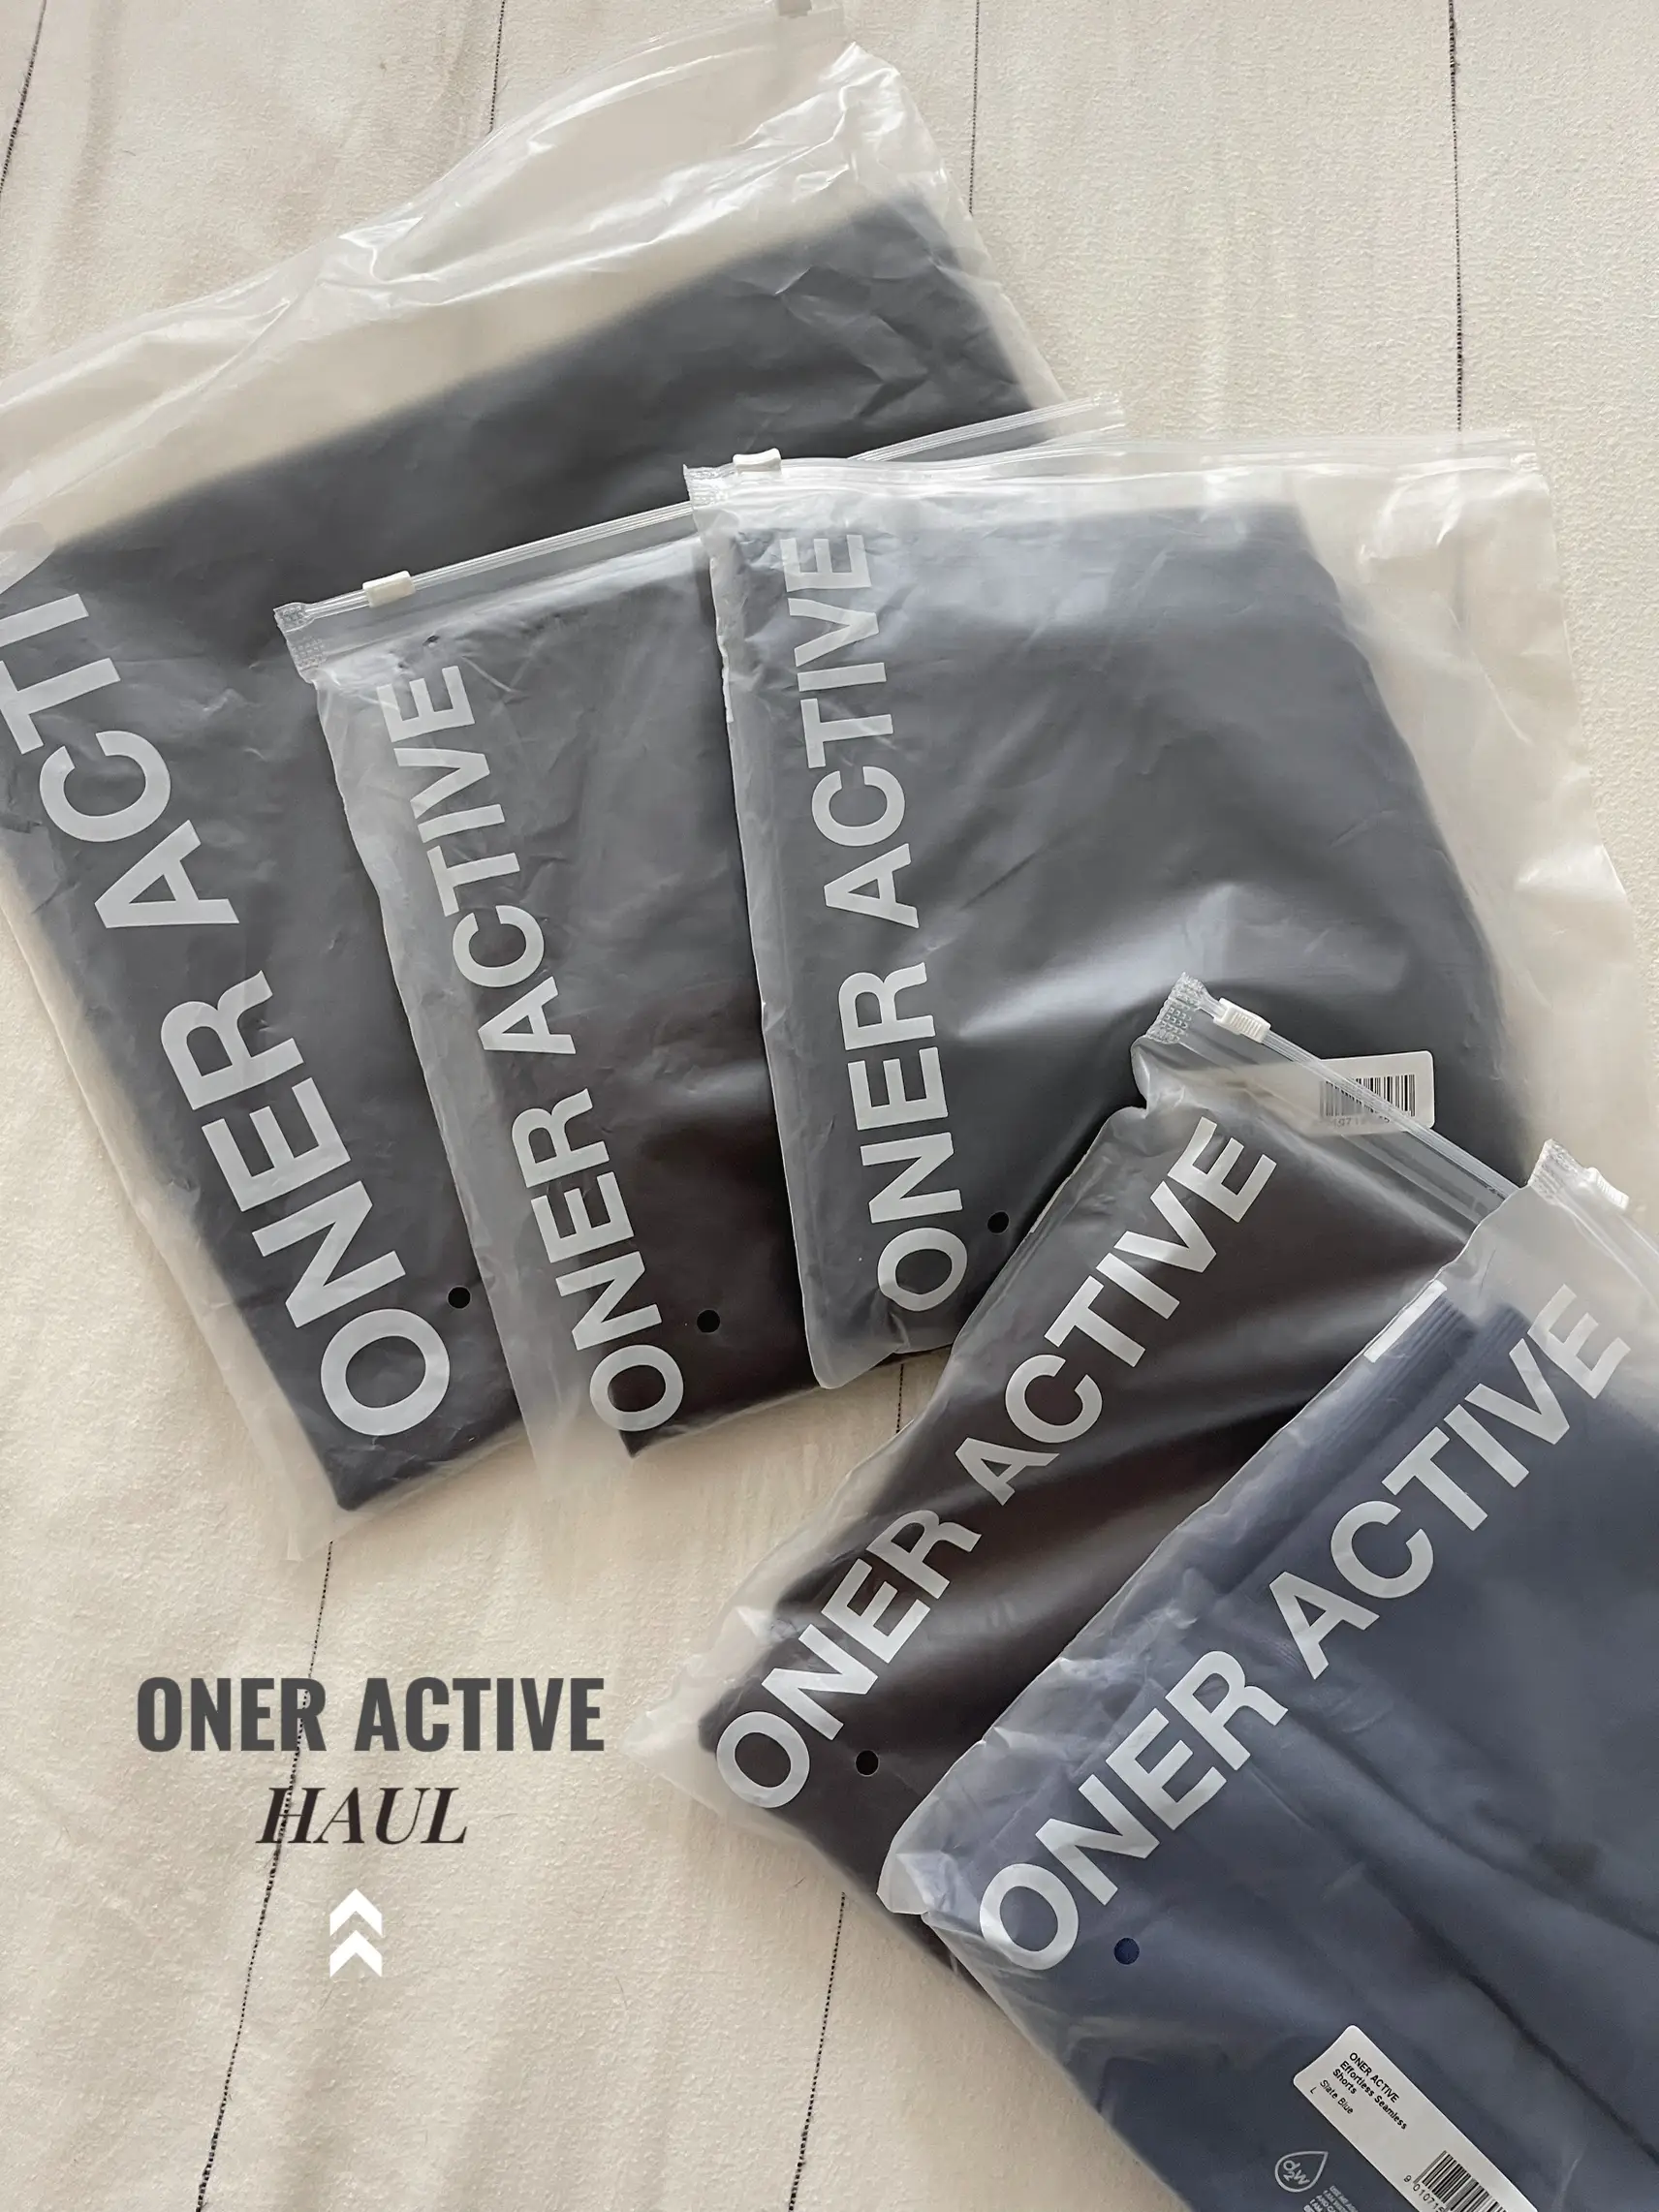 THE NEW ONER ACTIVE CLASSIC COLLECTION